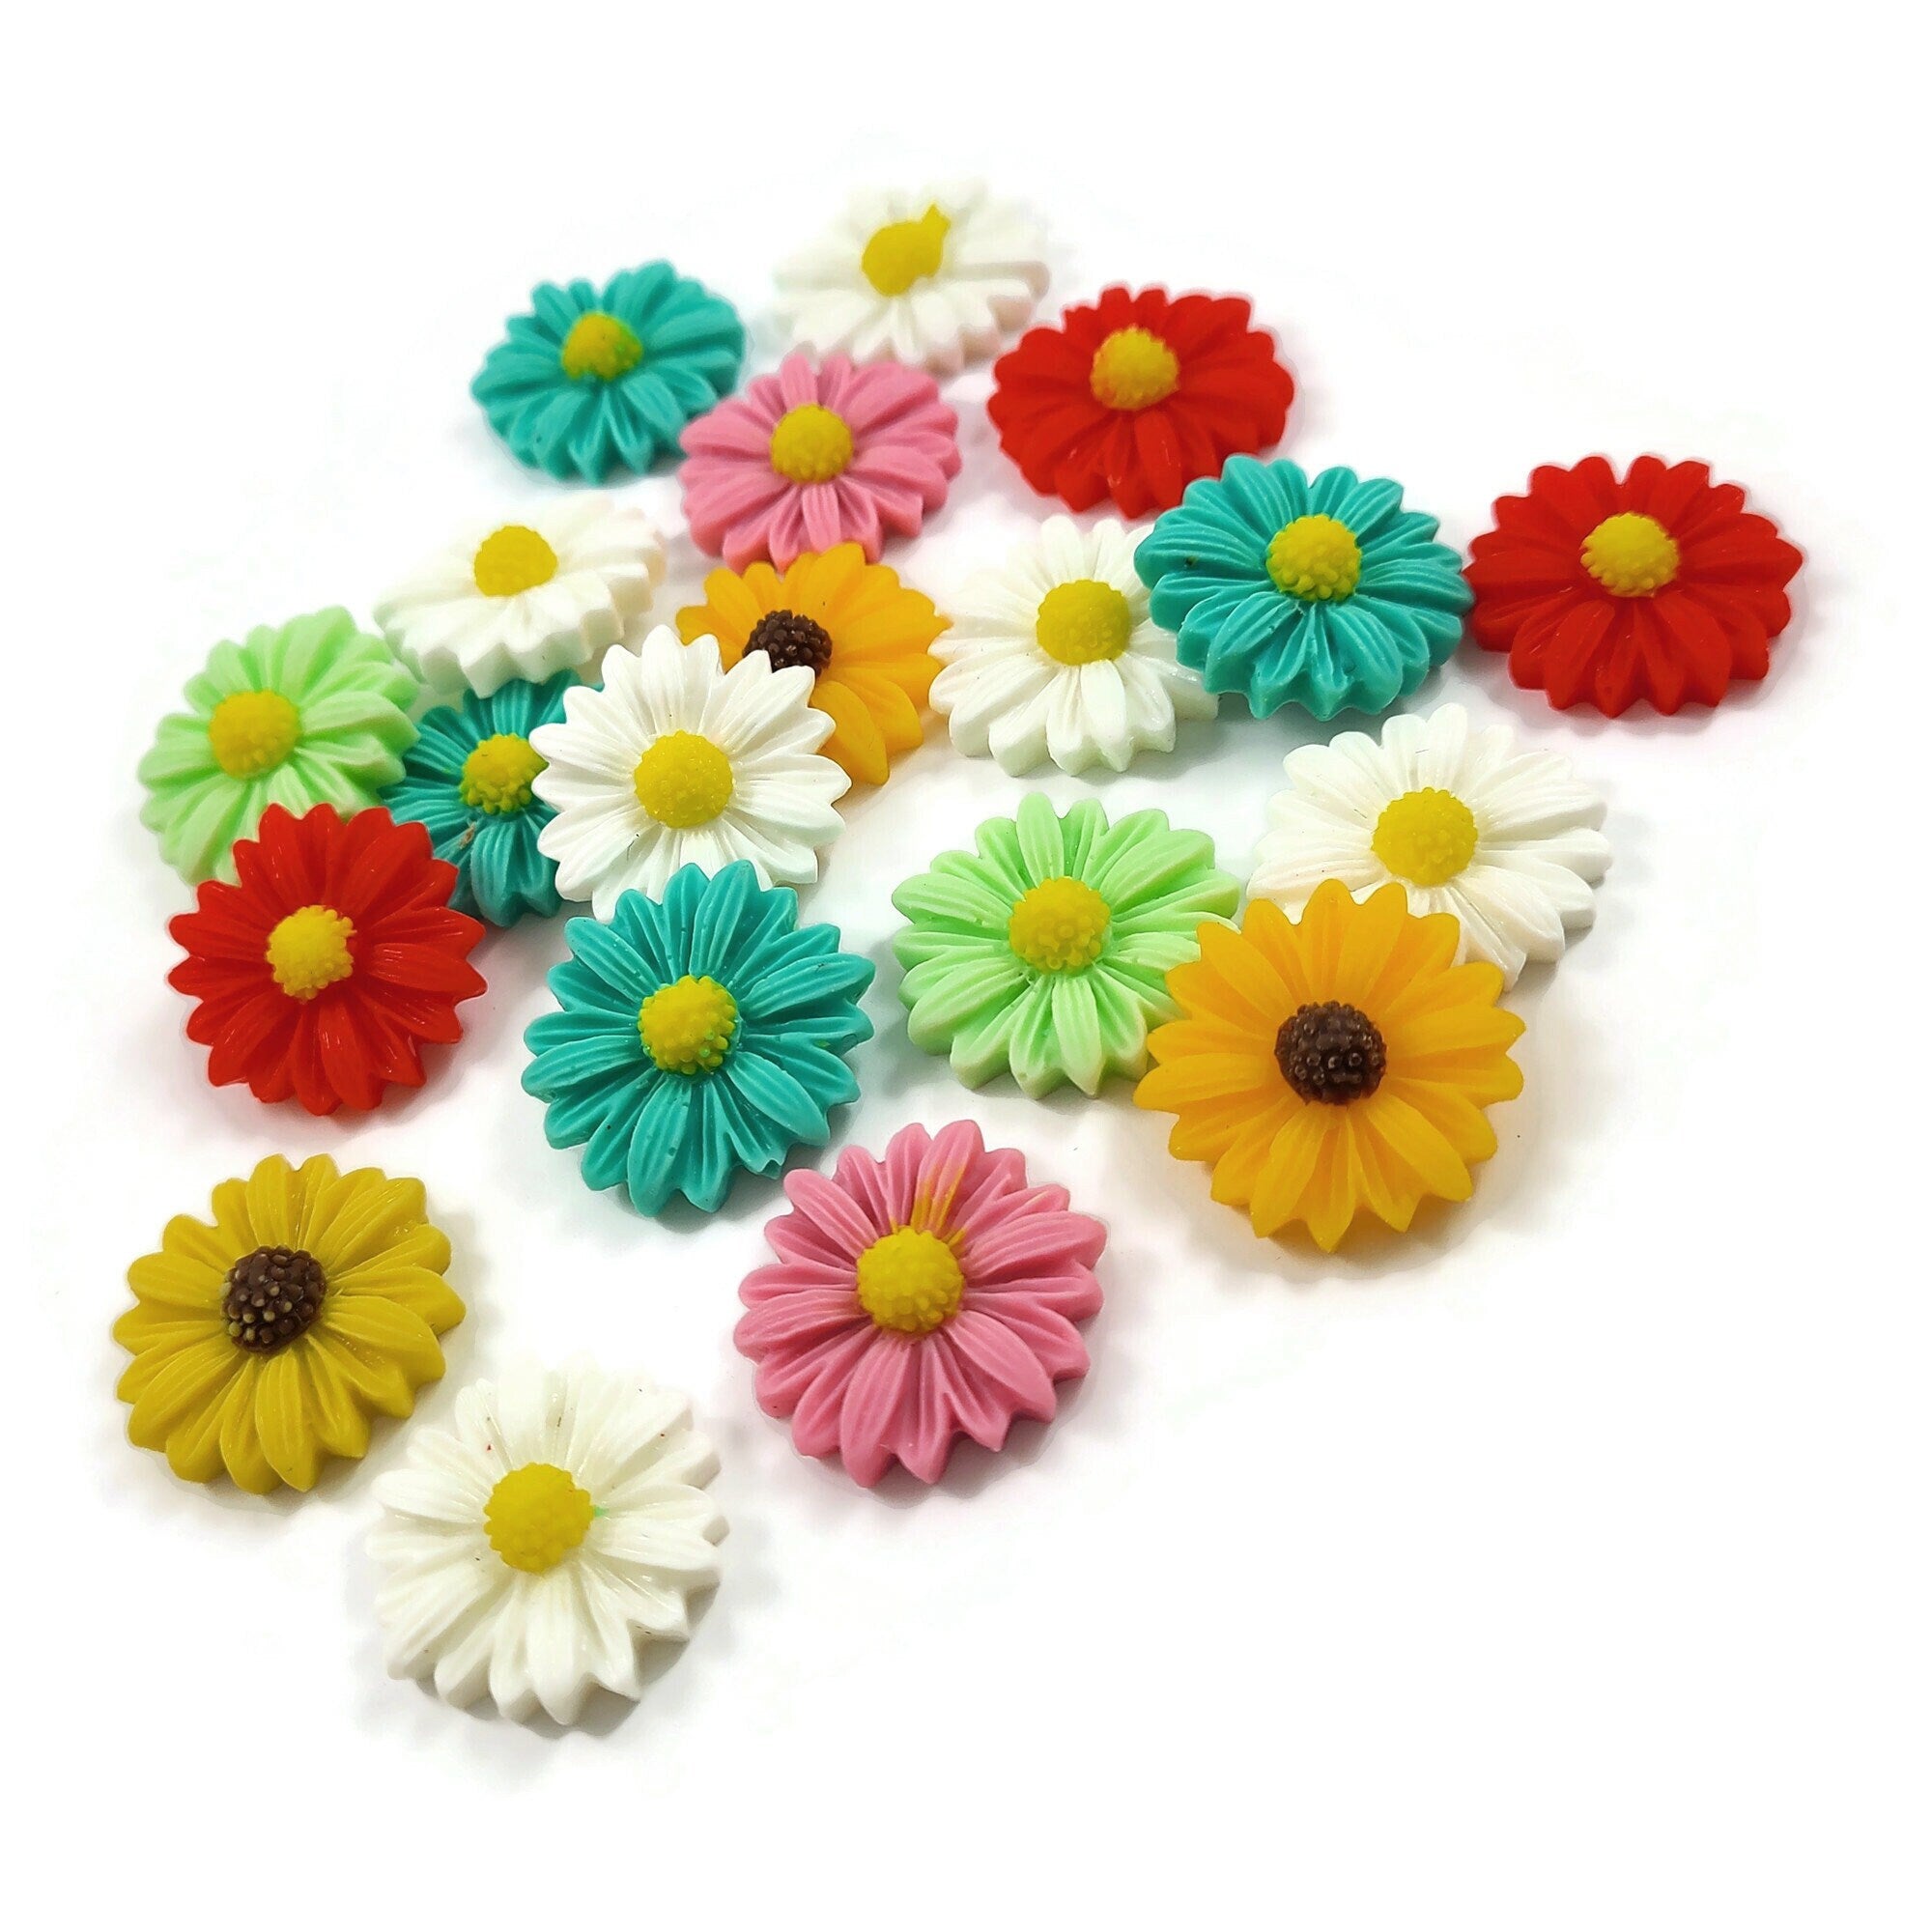 Resin flower cabochons, Mixed daisy embellishments, Flat back cabochons, Assorted pack, Jewelry making supplies